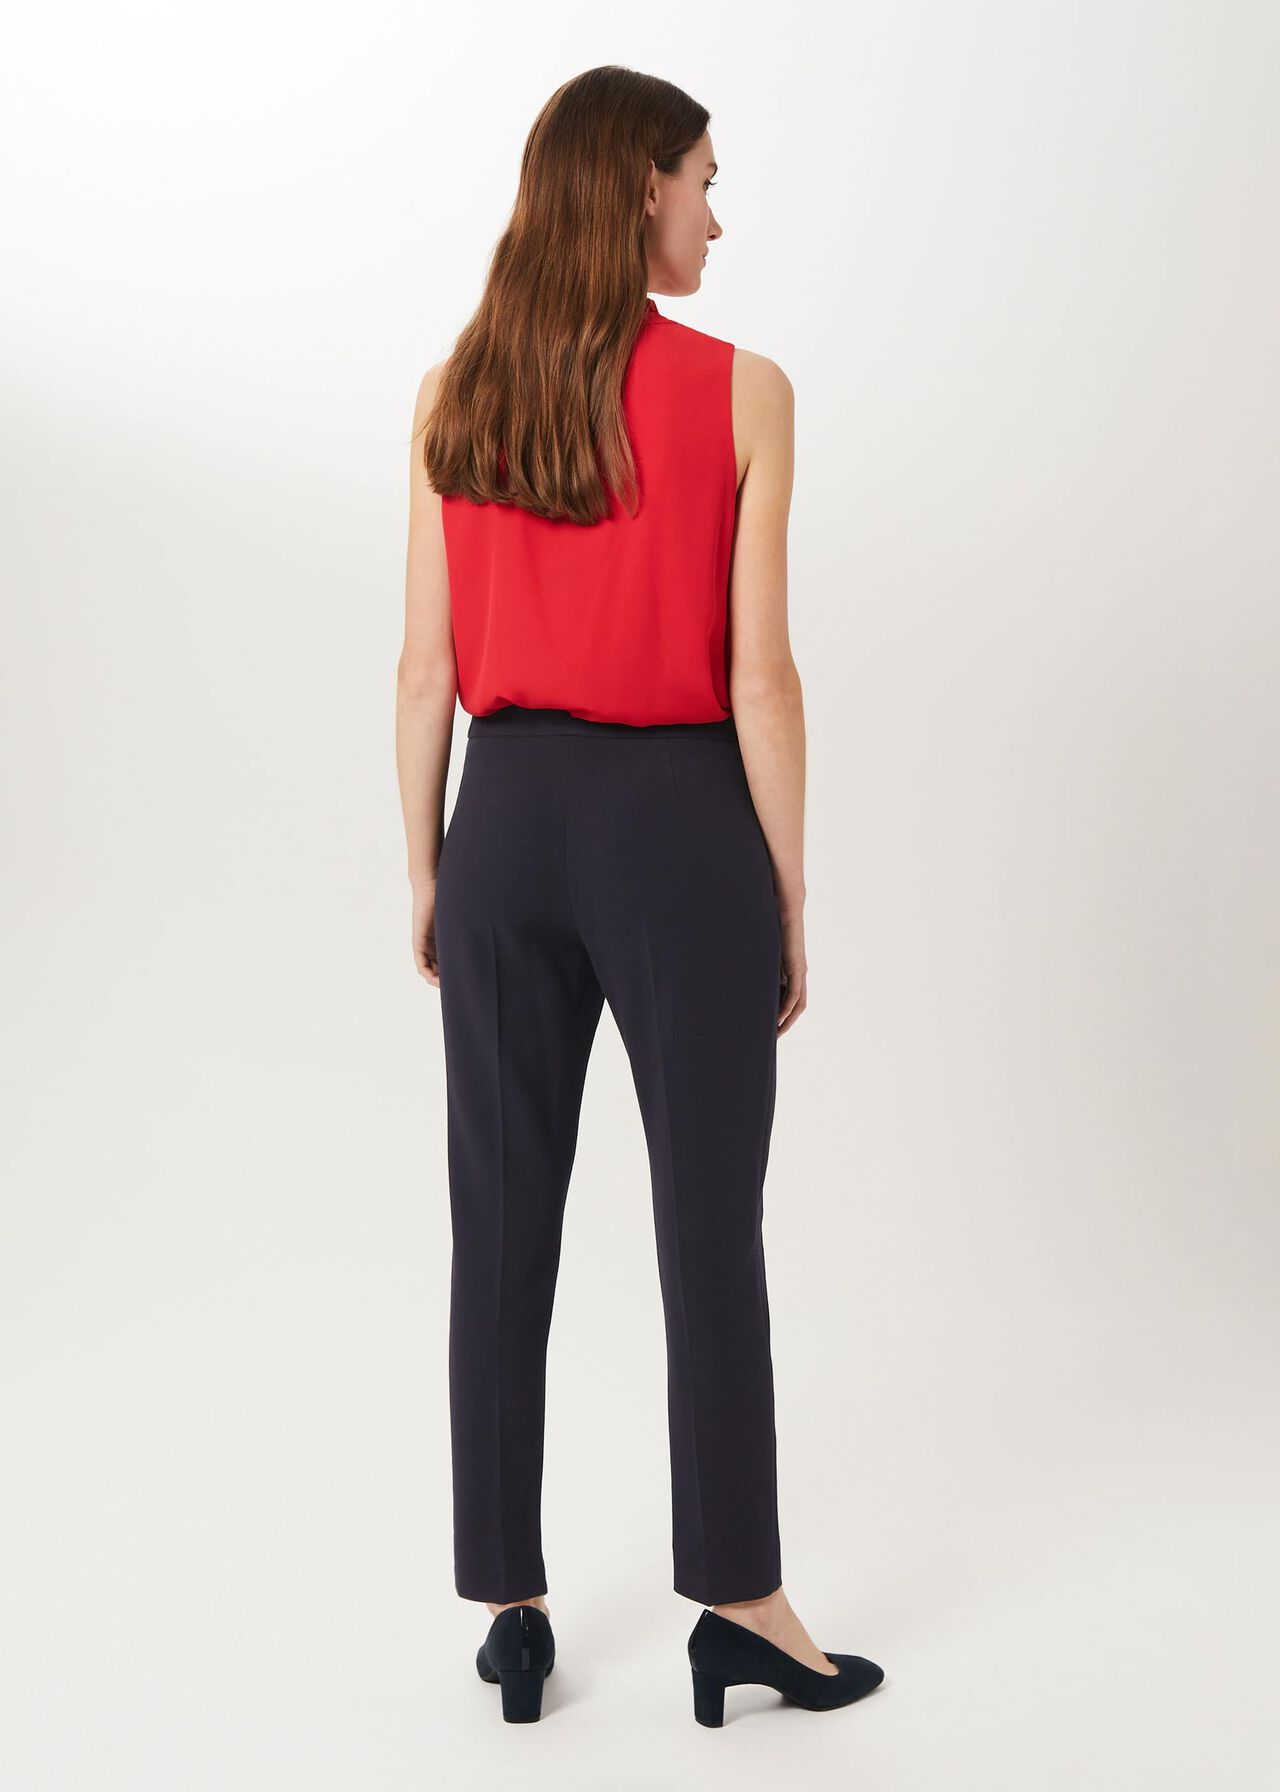 Leila Slim Trousers With Stretch, Navy, hi-res